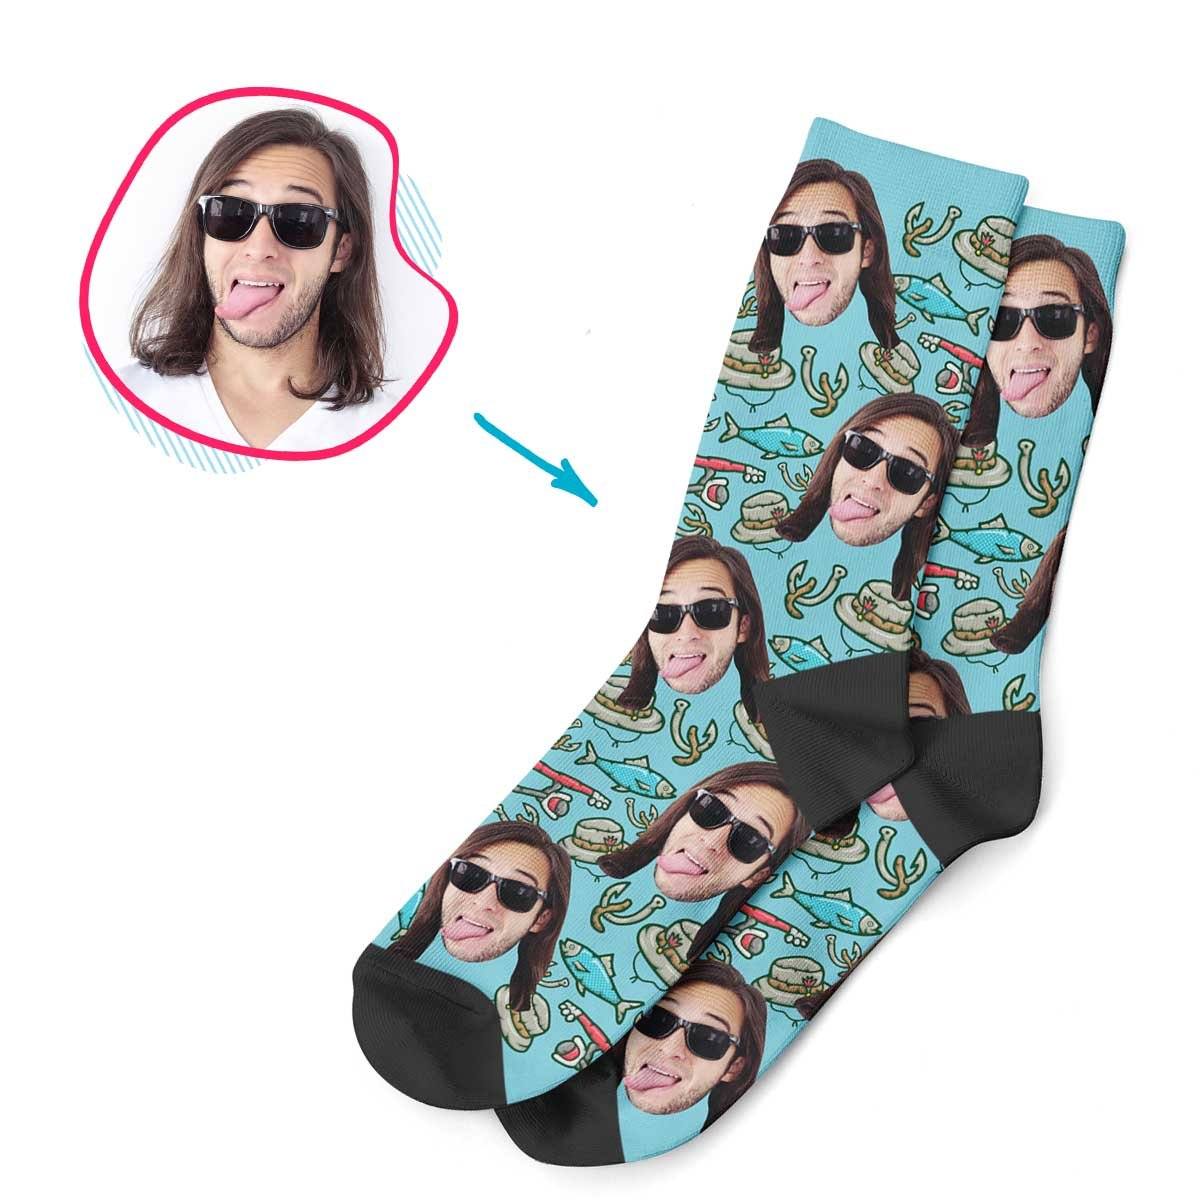 Blue Fishing personalized socks with photo of face printed on them